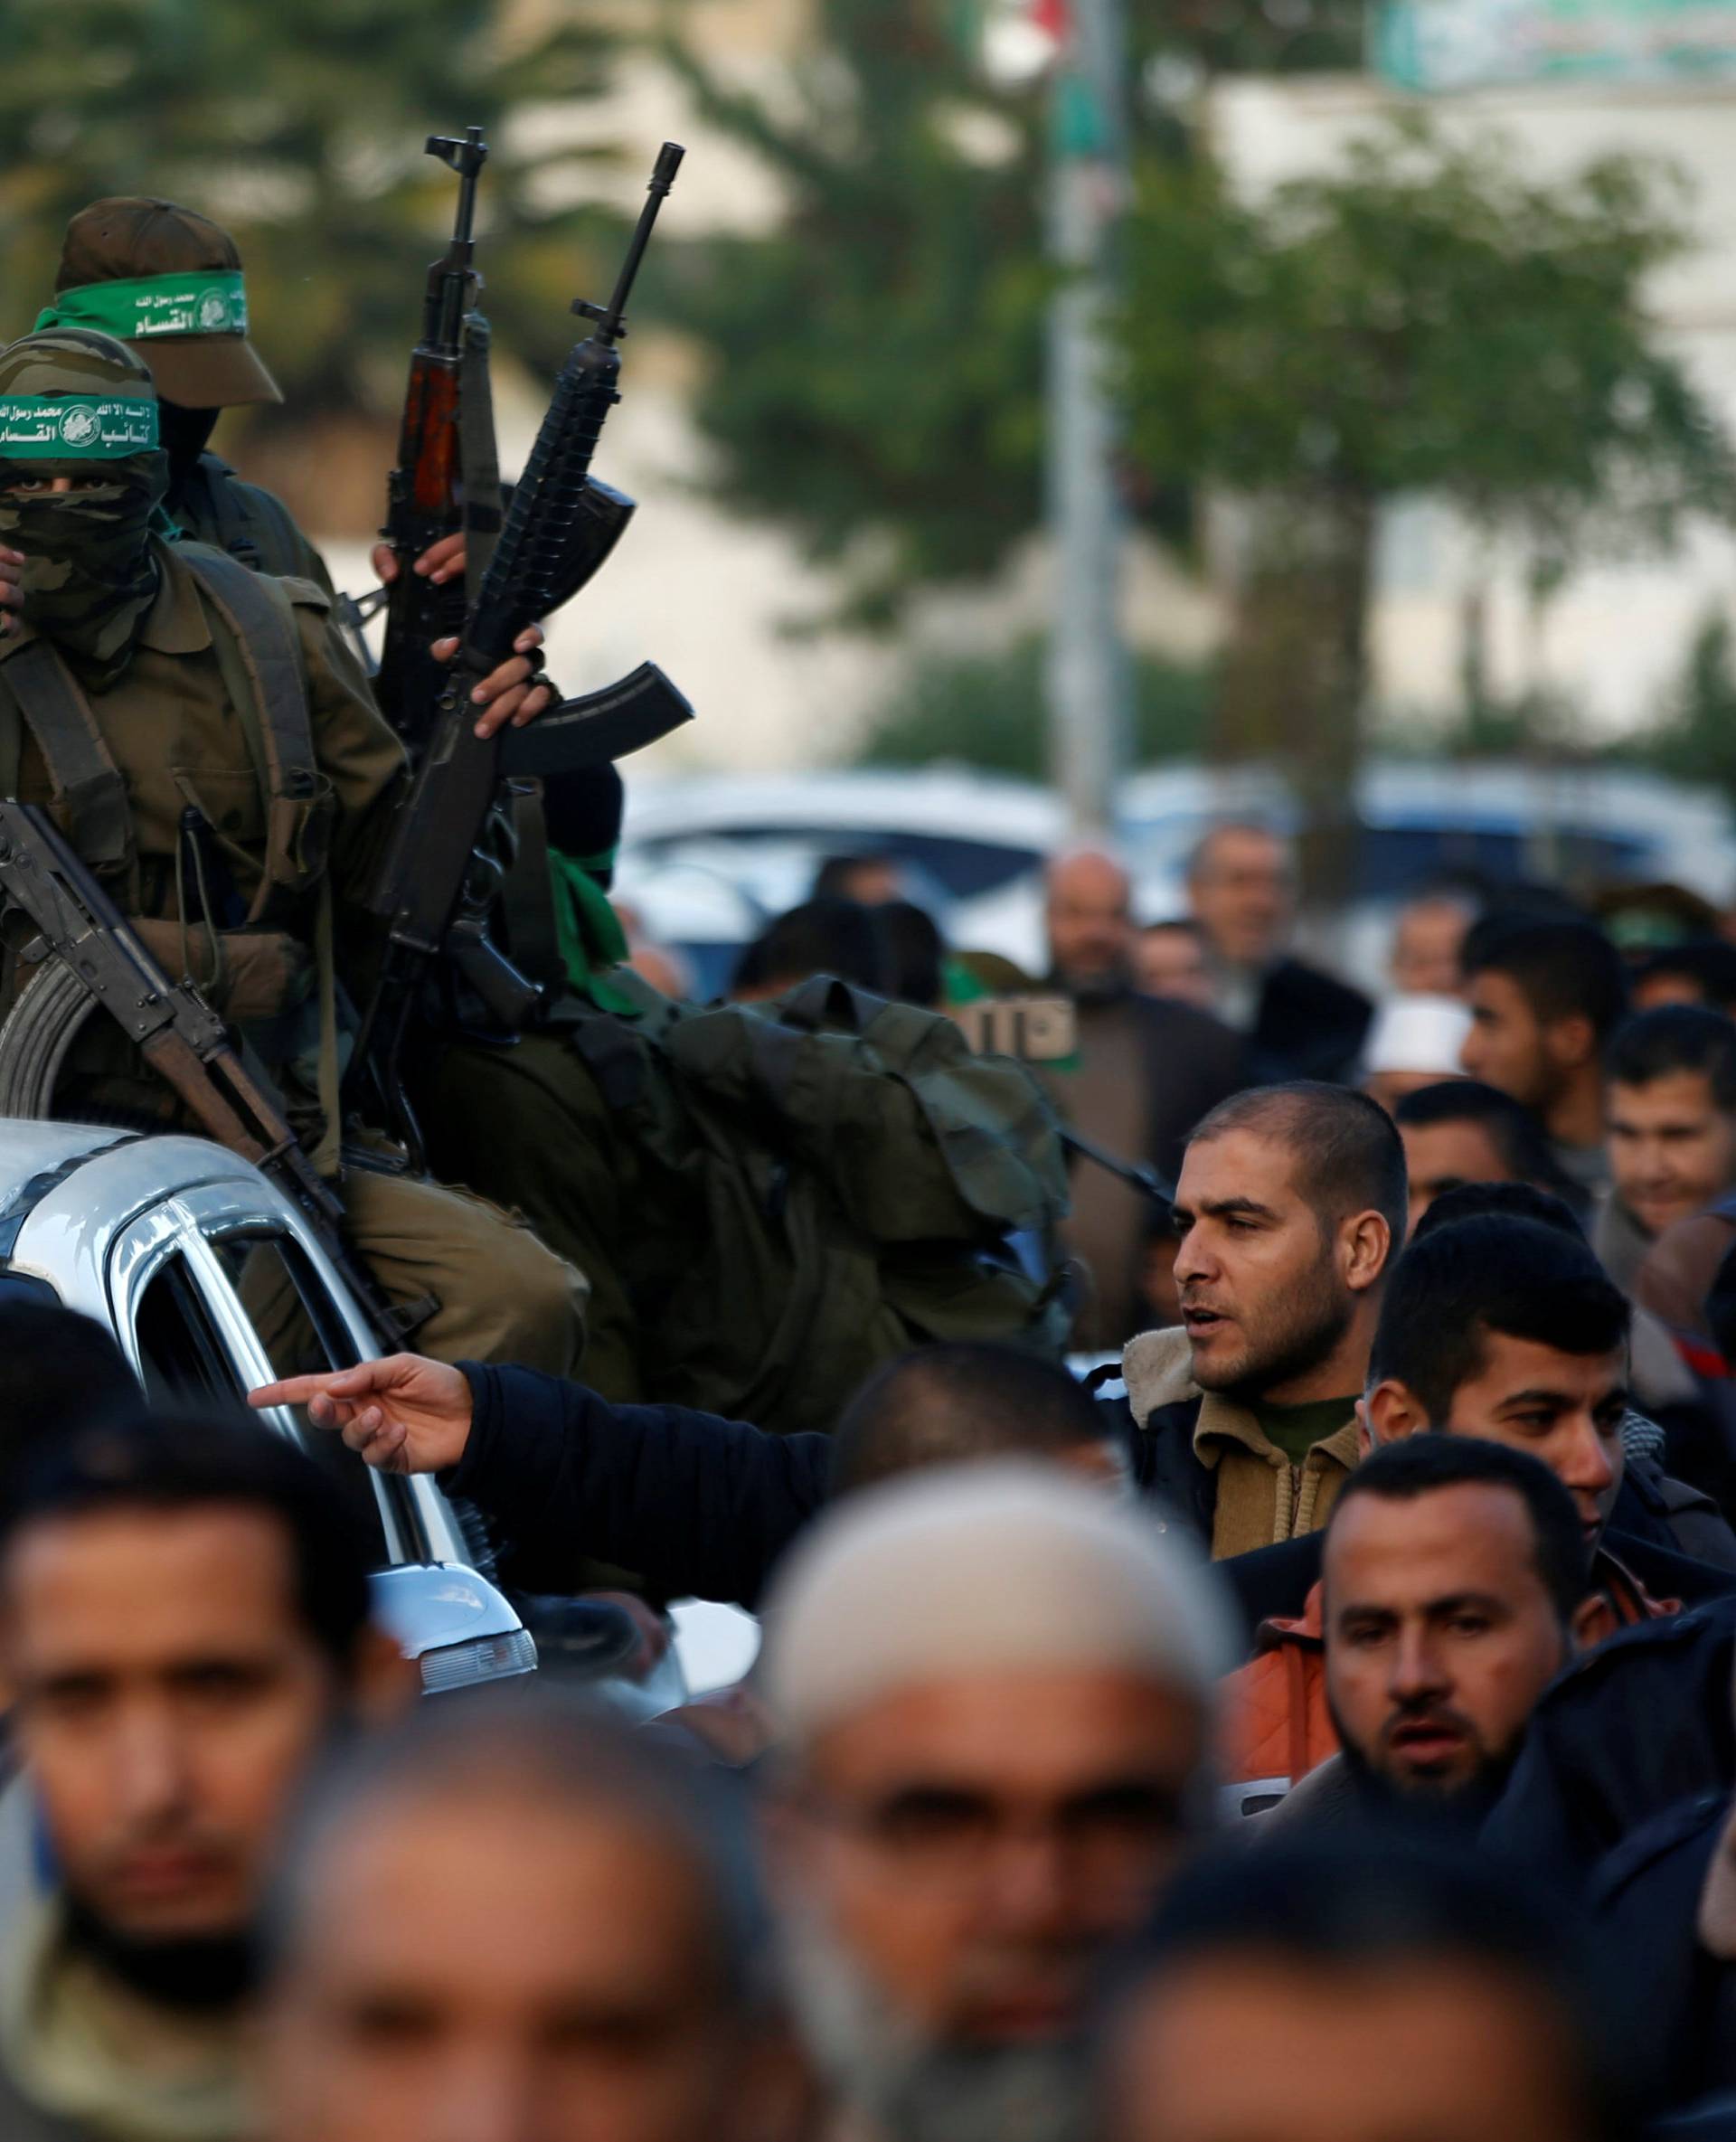 Palestinian Hamas militants take part in a protest against U.S. President Donald Trump's decision to recognize Jerusalem as the capital of Israel, in the northern Gaza Strip